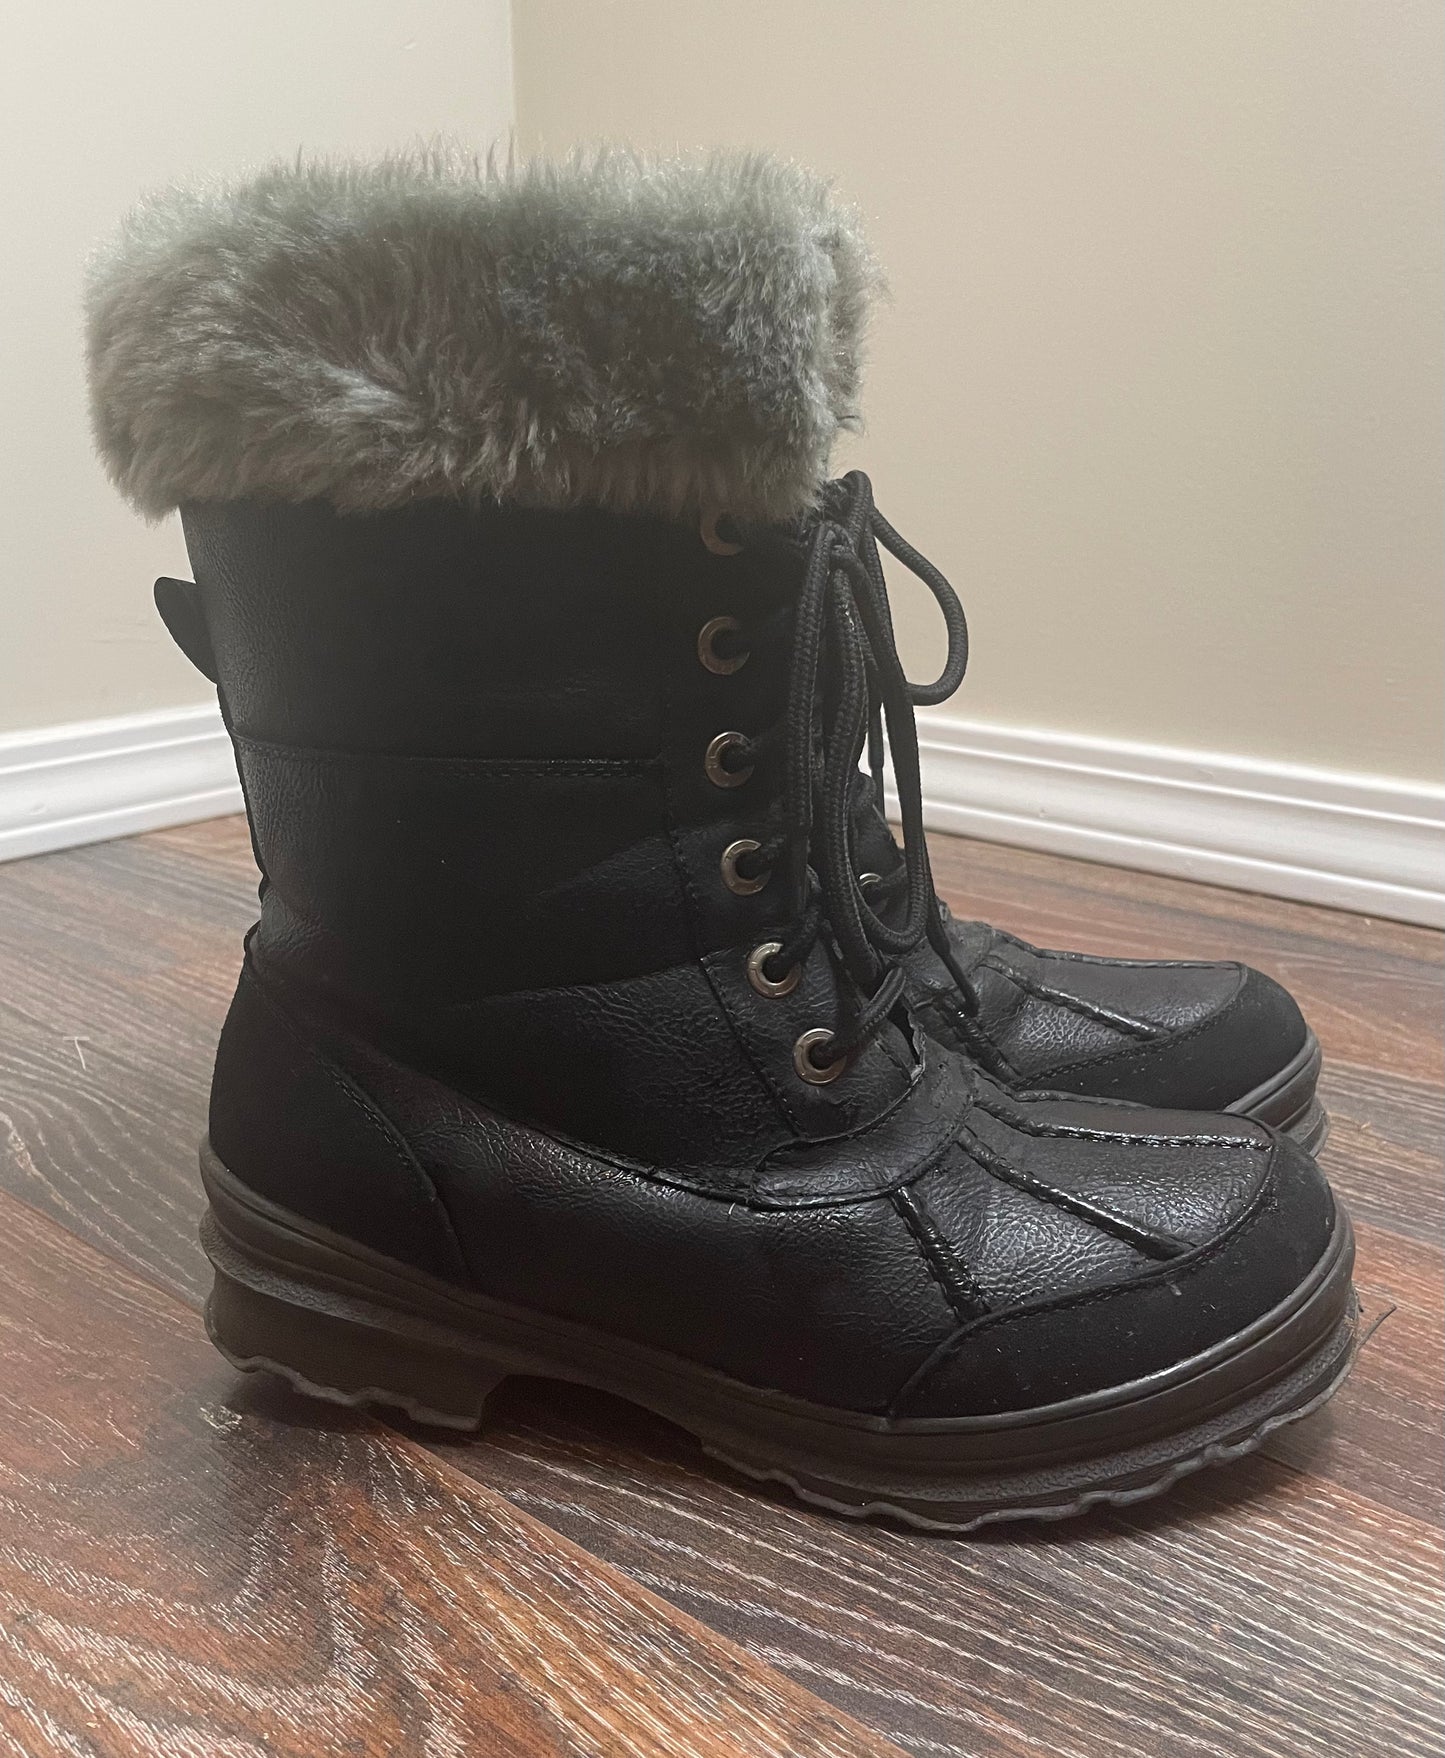 Comfy Moda Italy Boots Size 8